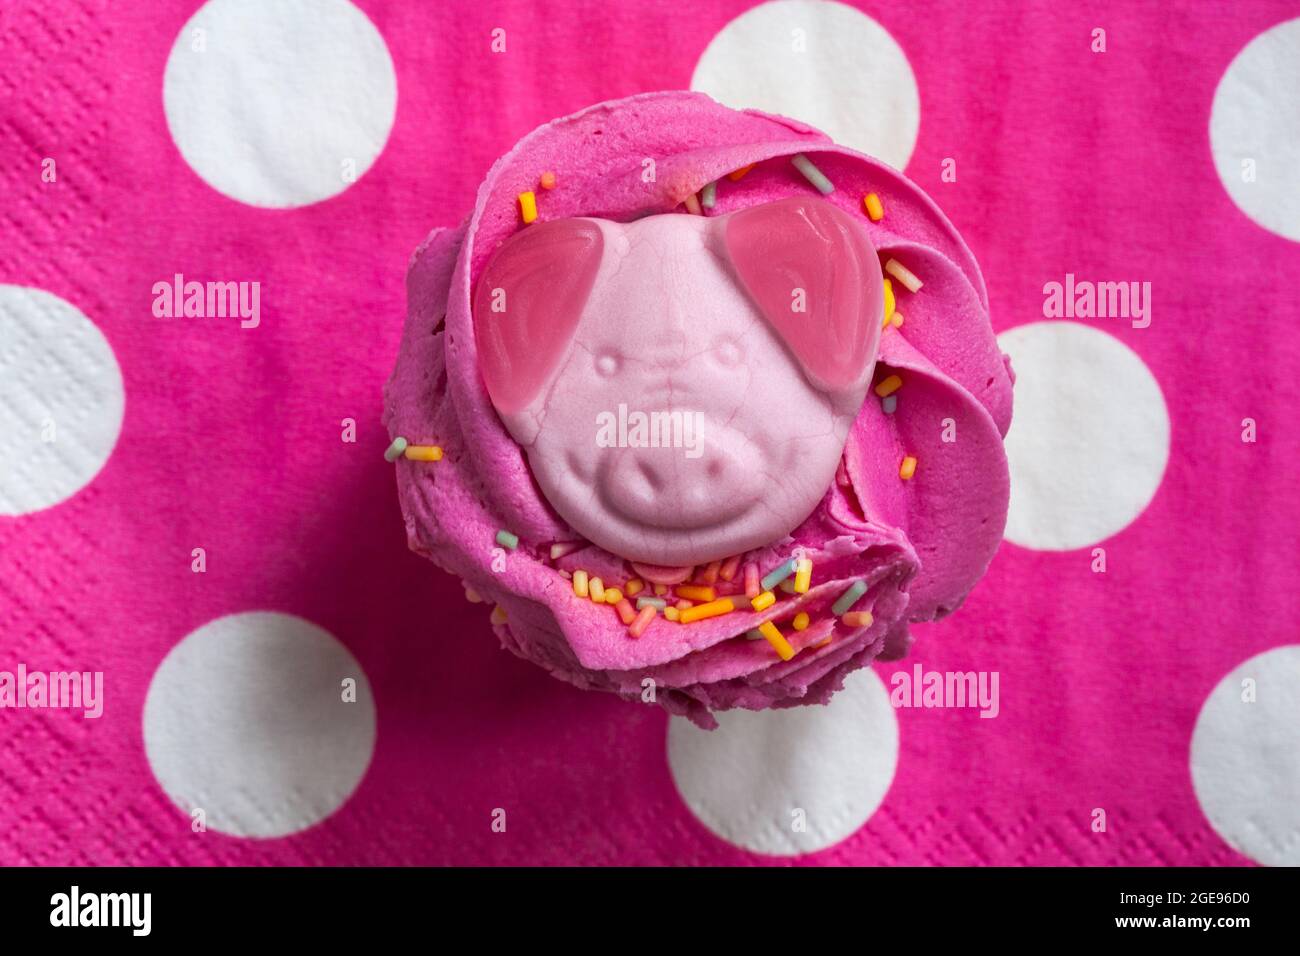 Percy Pig party cupcake cake from M&S set on pink polka dot serviette napkin Stock Photo